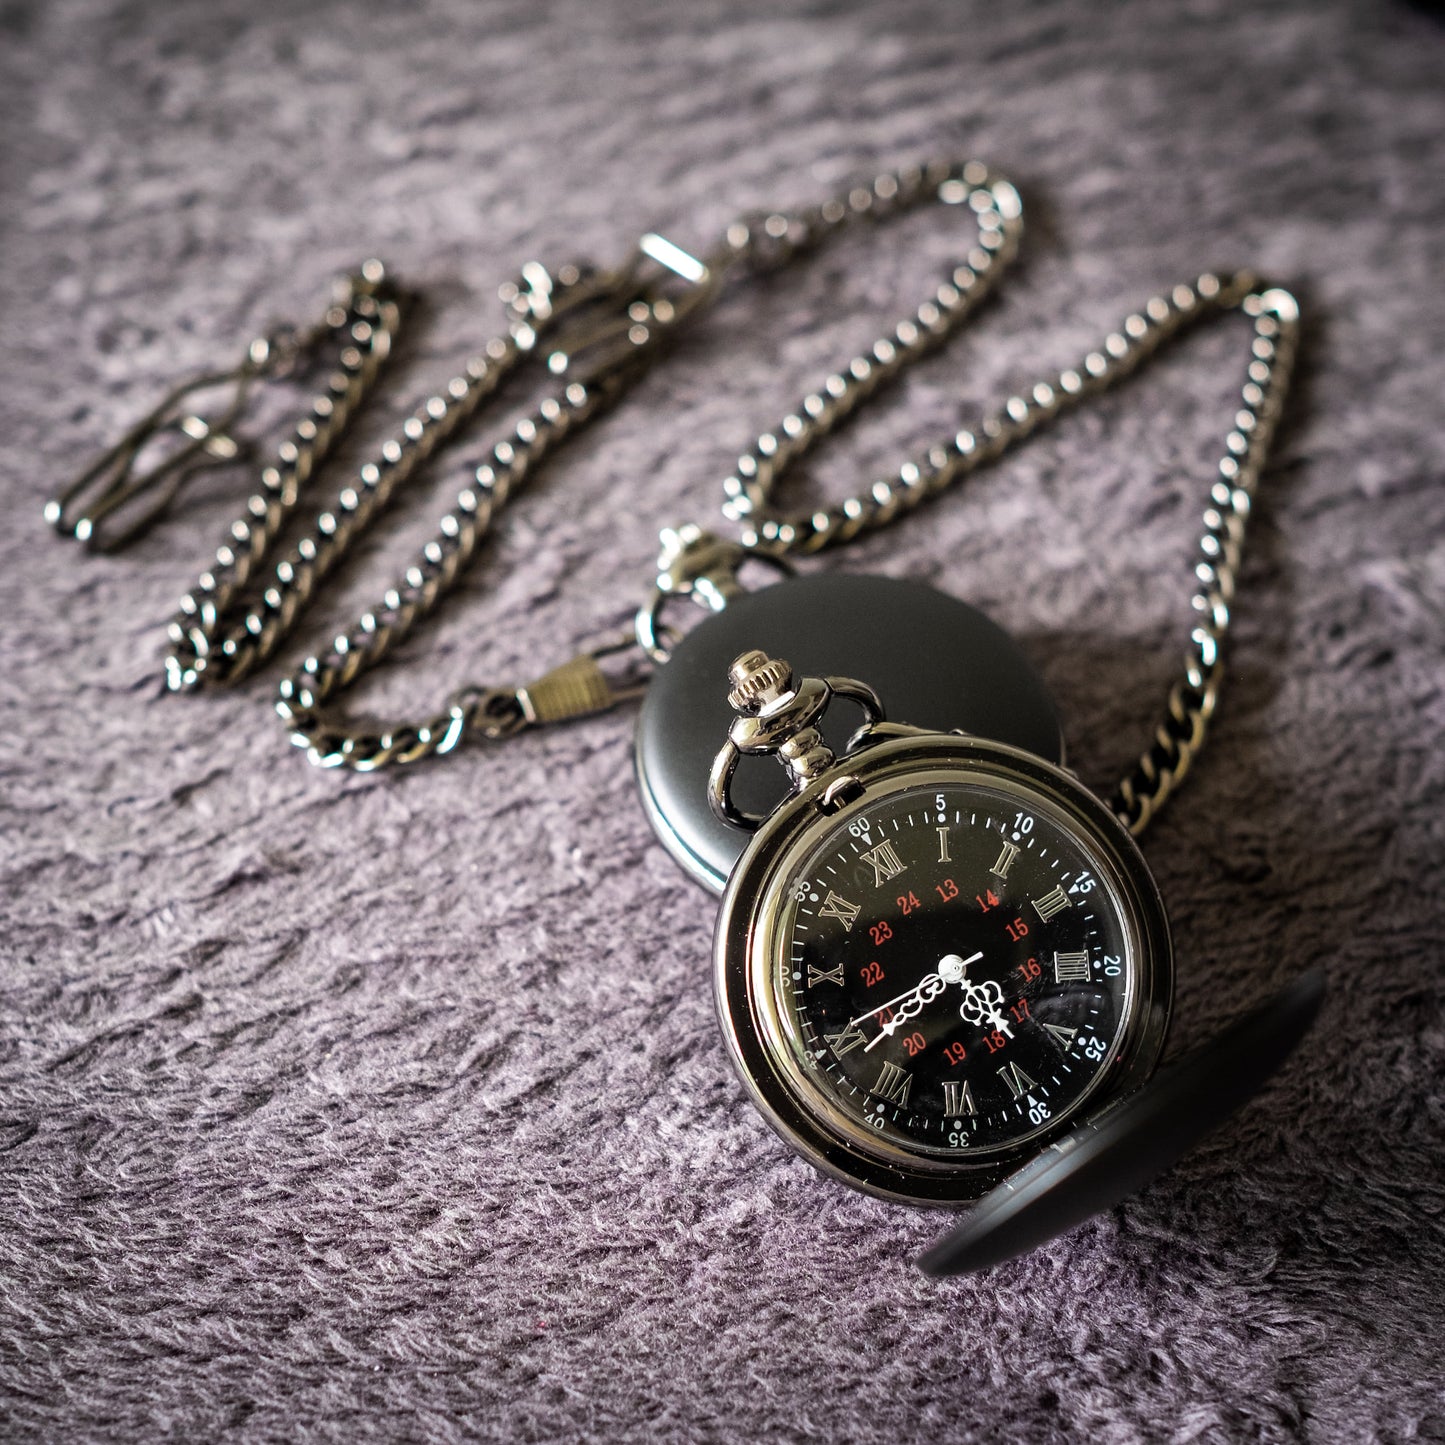 To My Grandson Pocket Watch from Grandad, Gift for Grandson, Black Engraved Pocket Watch, If I Could Give You One Thing, Birthday, Christmas Gift.